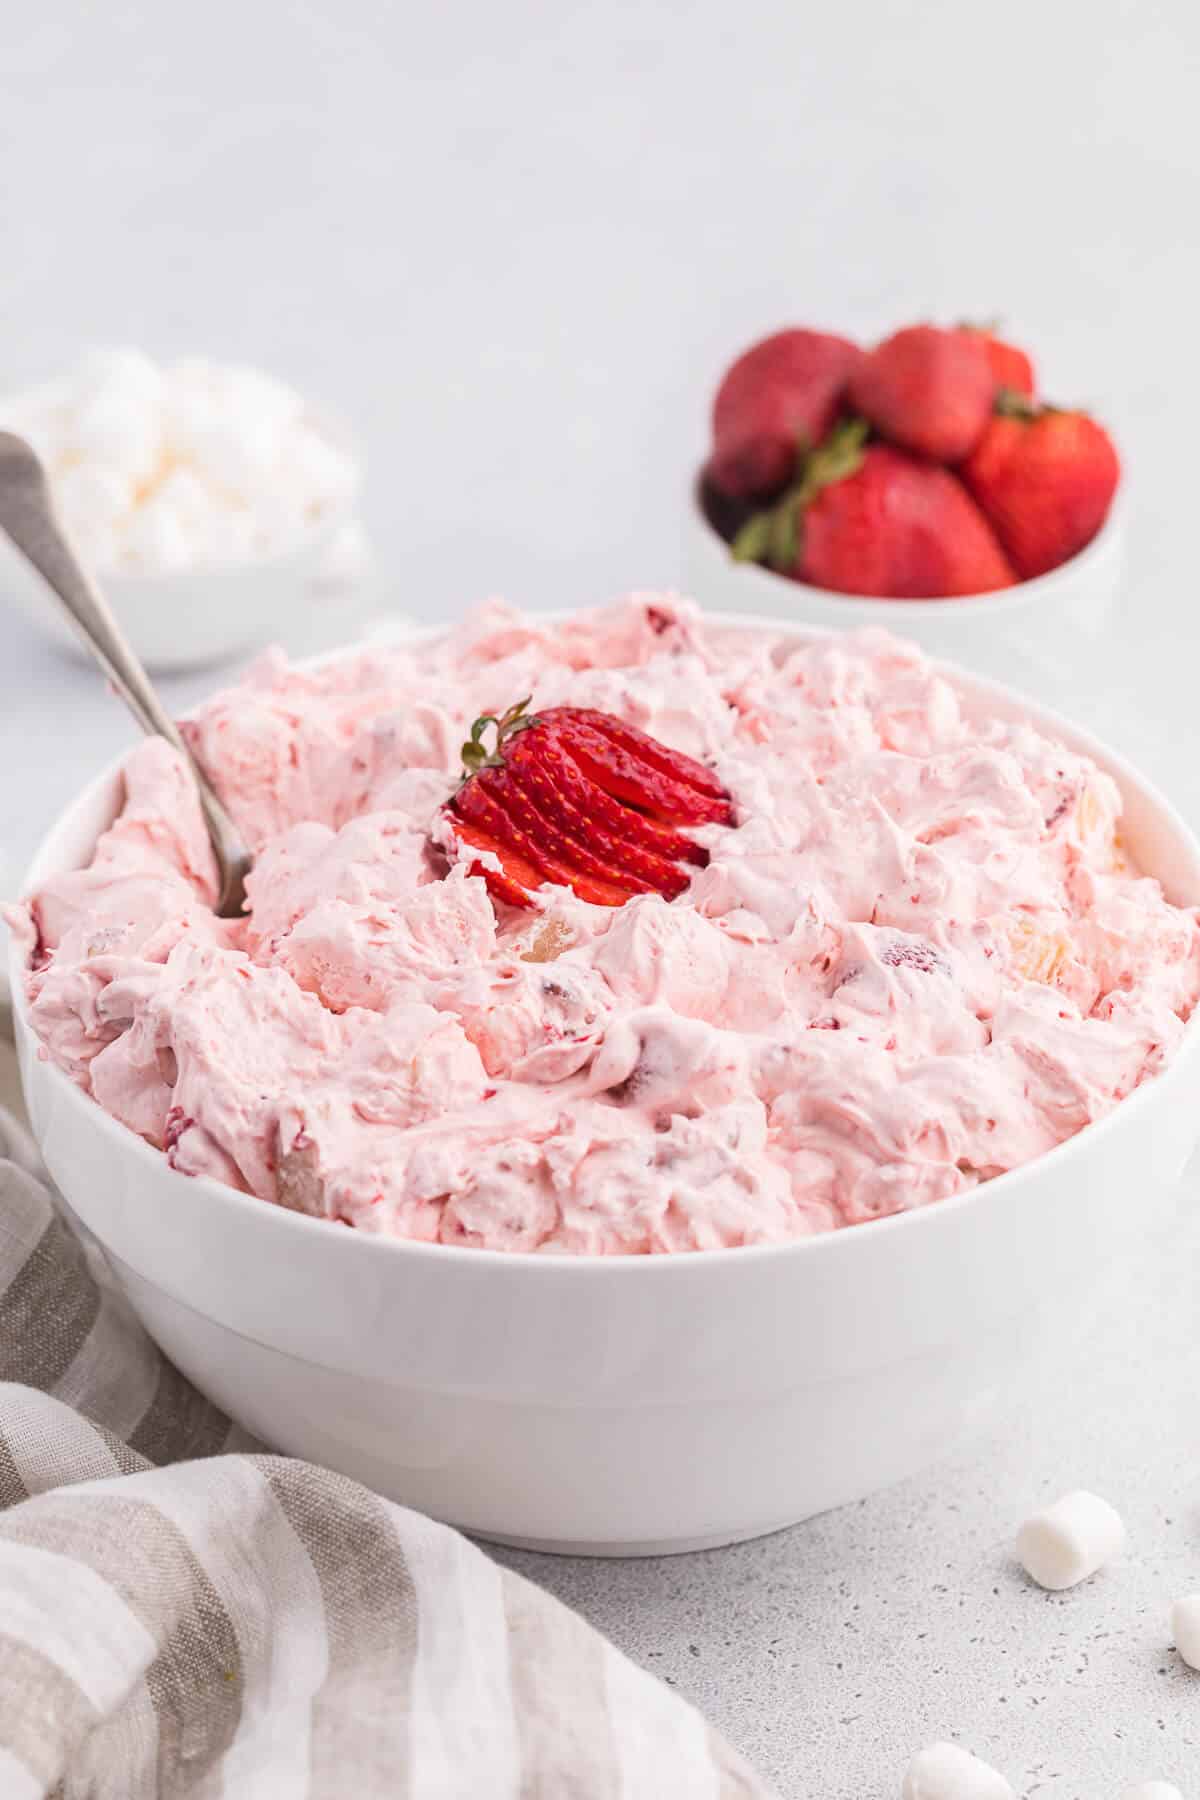 Strawberry fluff salad in a white bowl with a spoon.